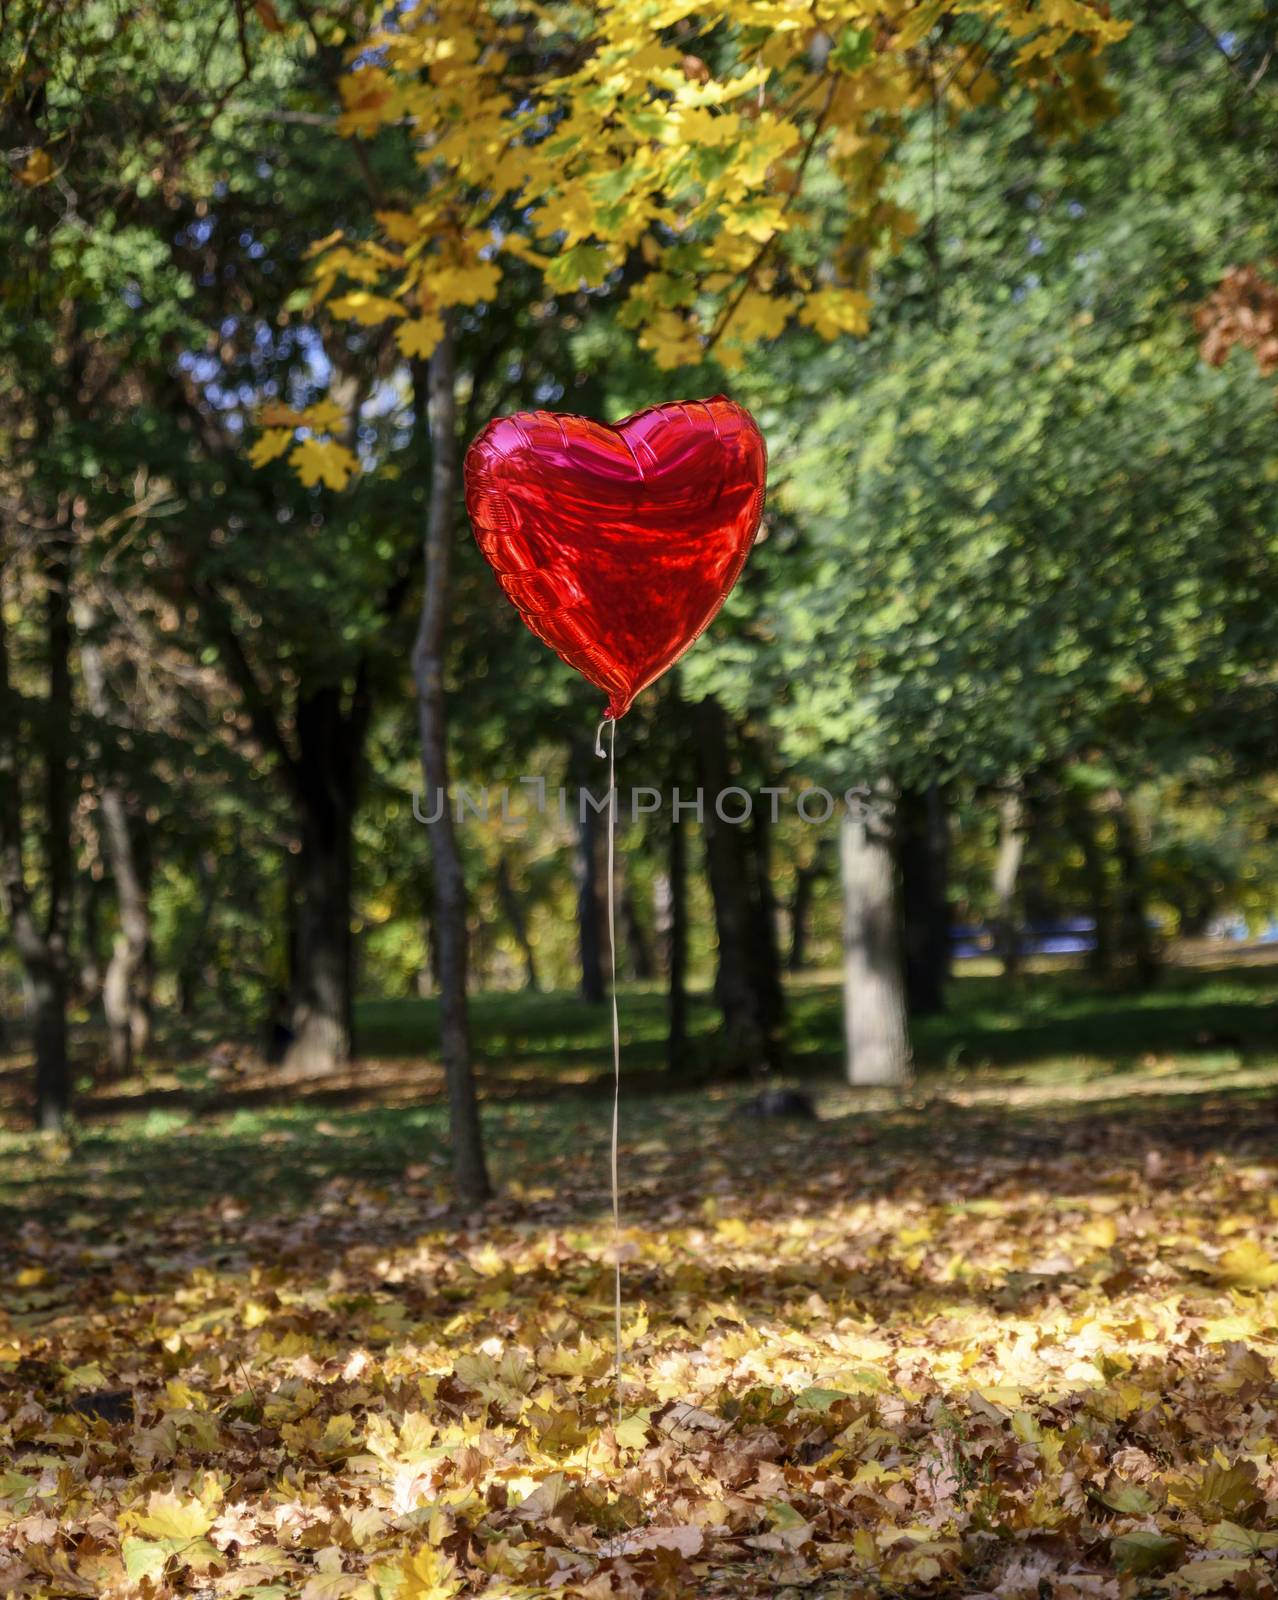 red balloon flies in the autumn park against the background of fallen yellow foliage and trees